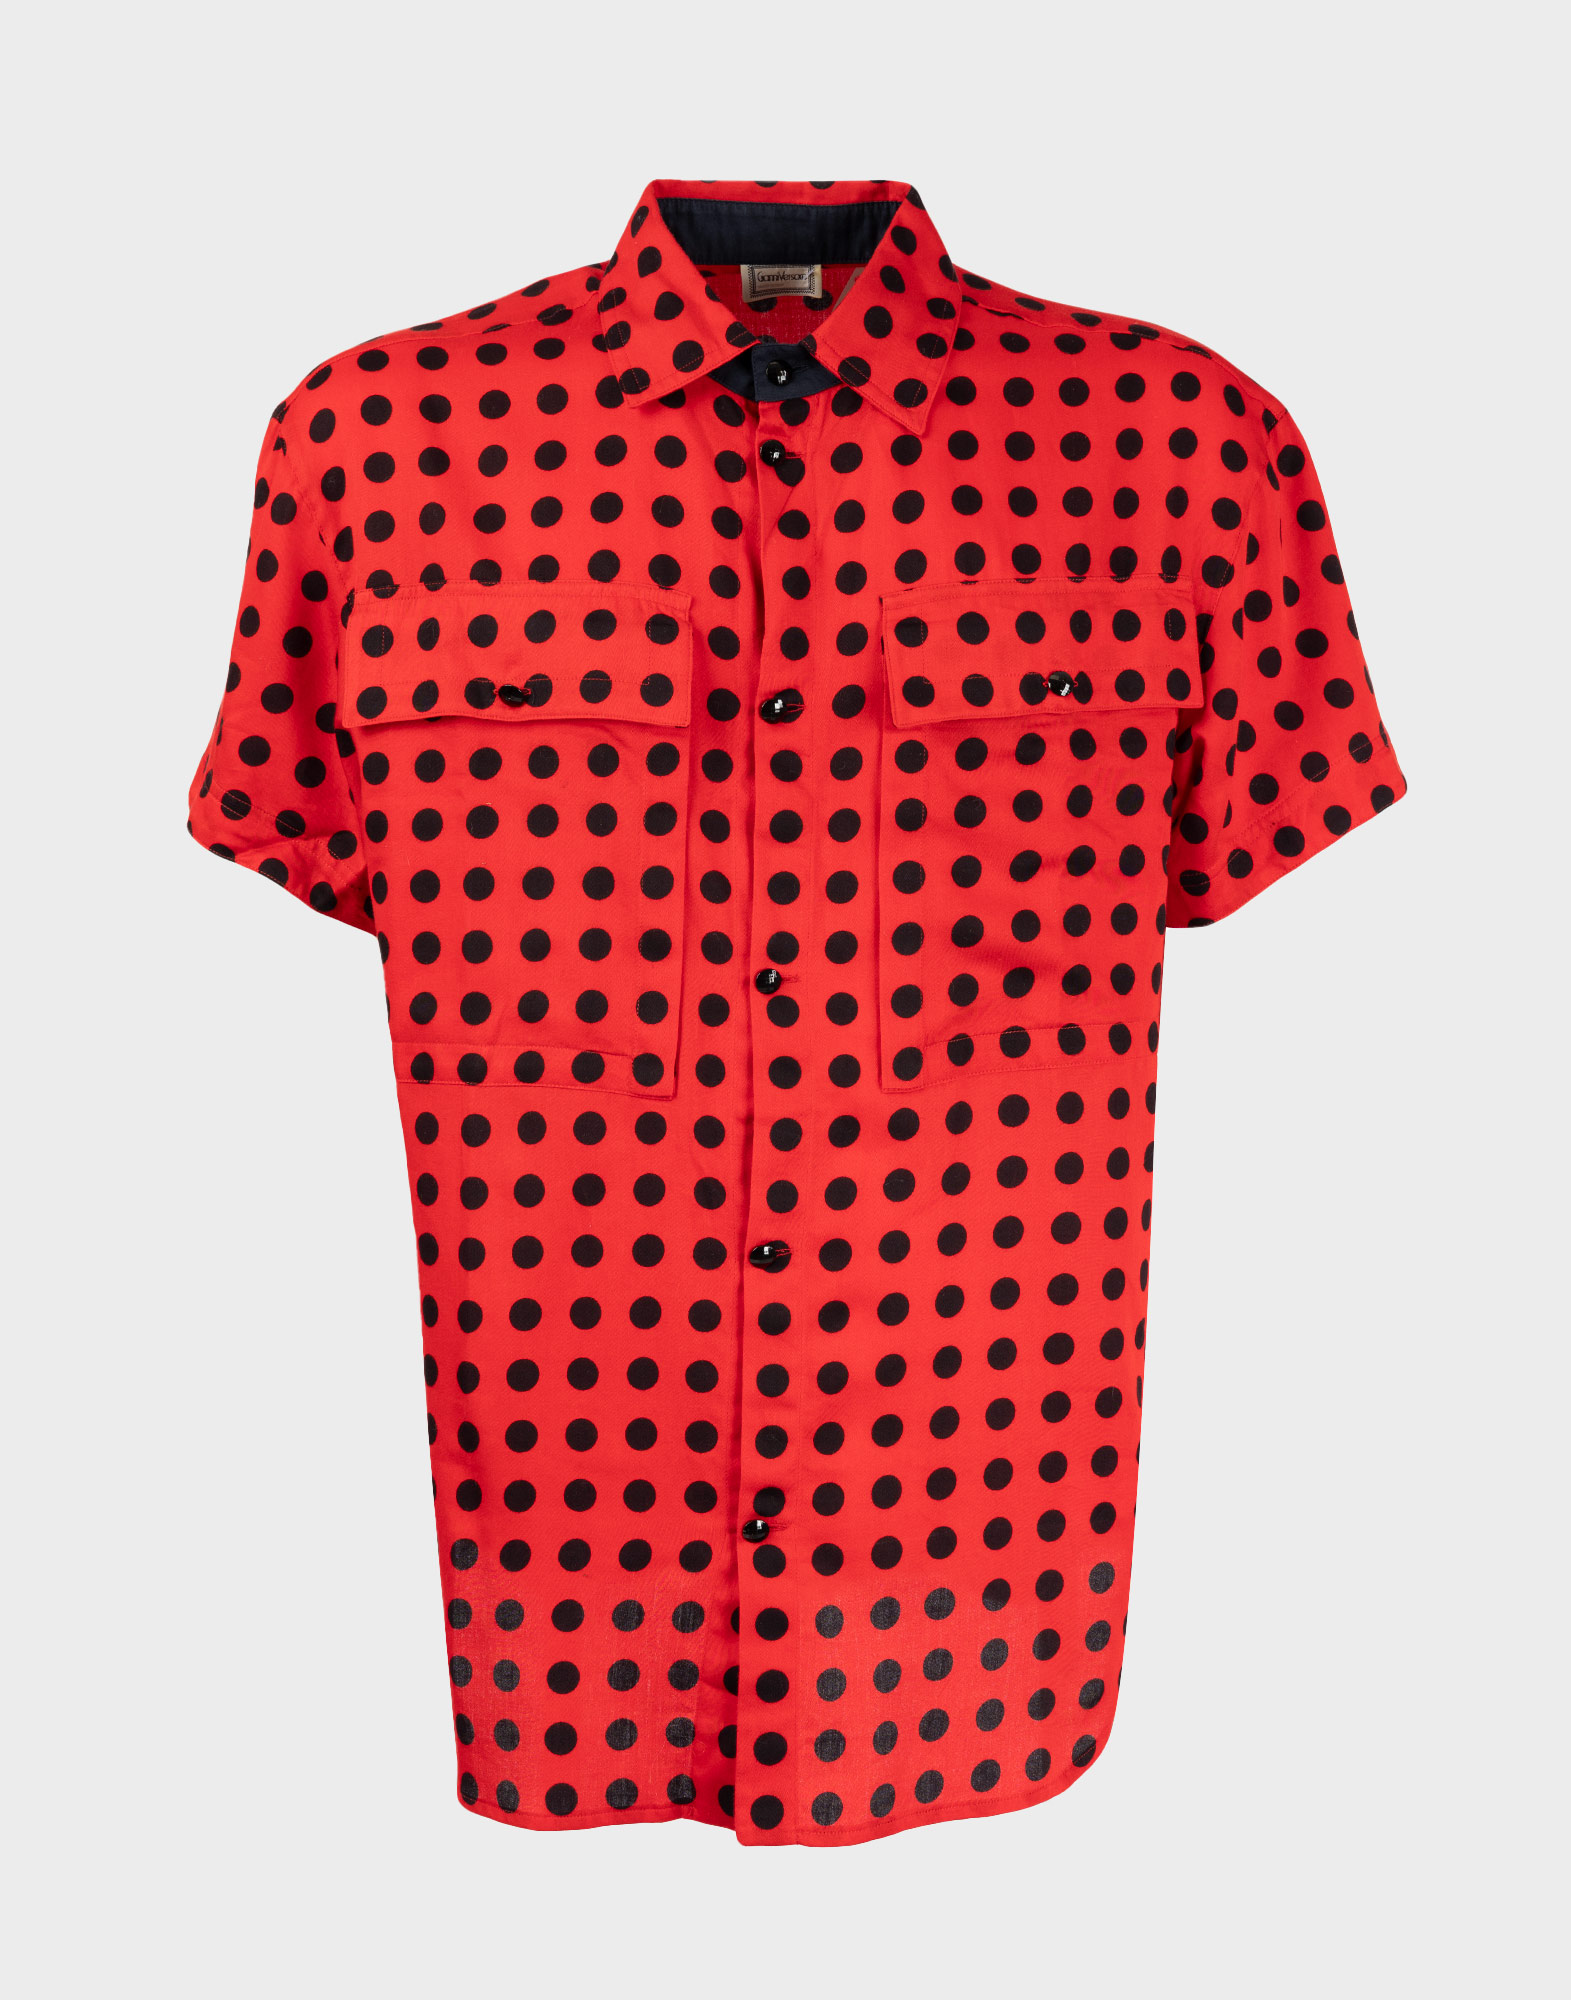 man's red shirt gianni versace from 1980s with black polka dots pattern